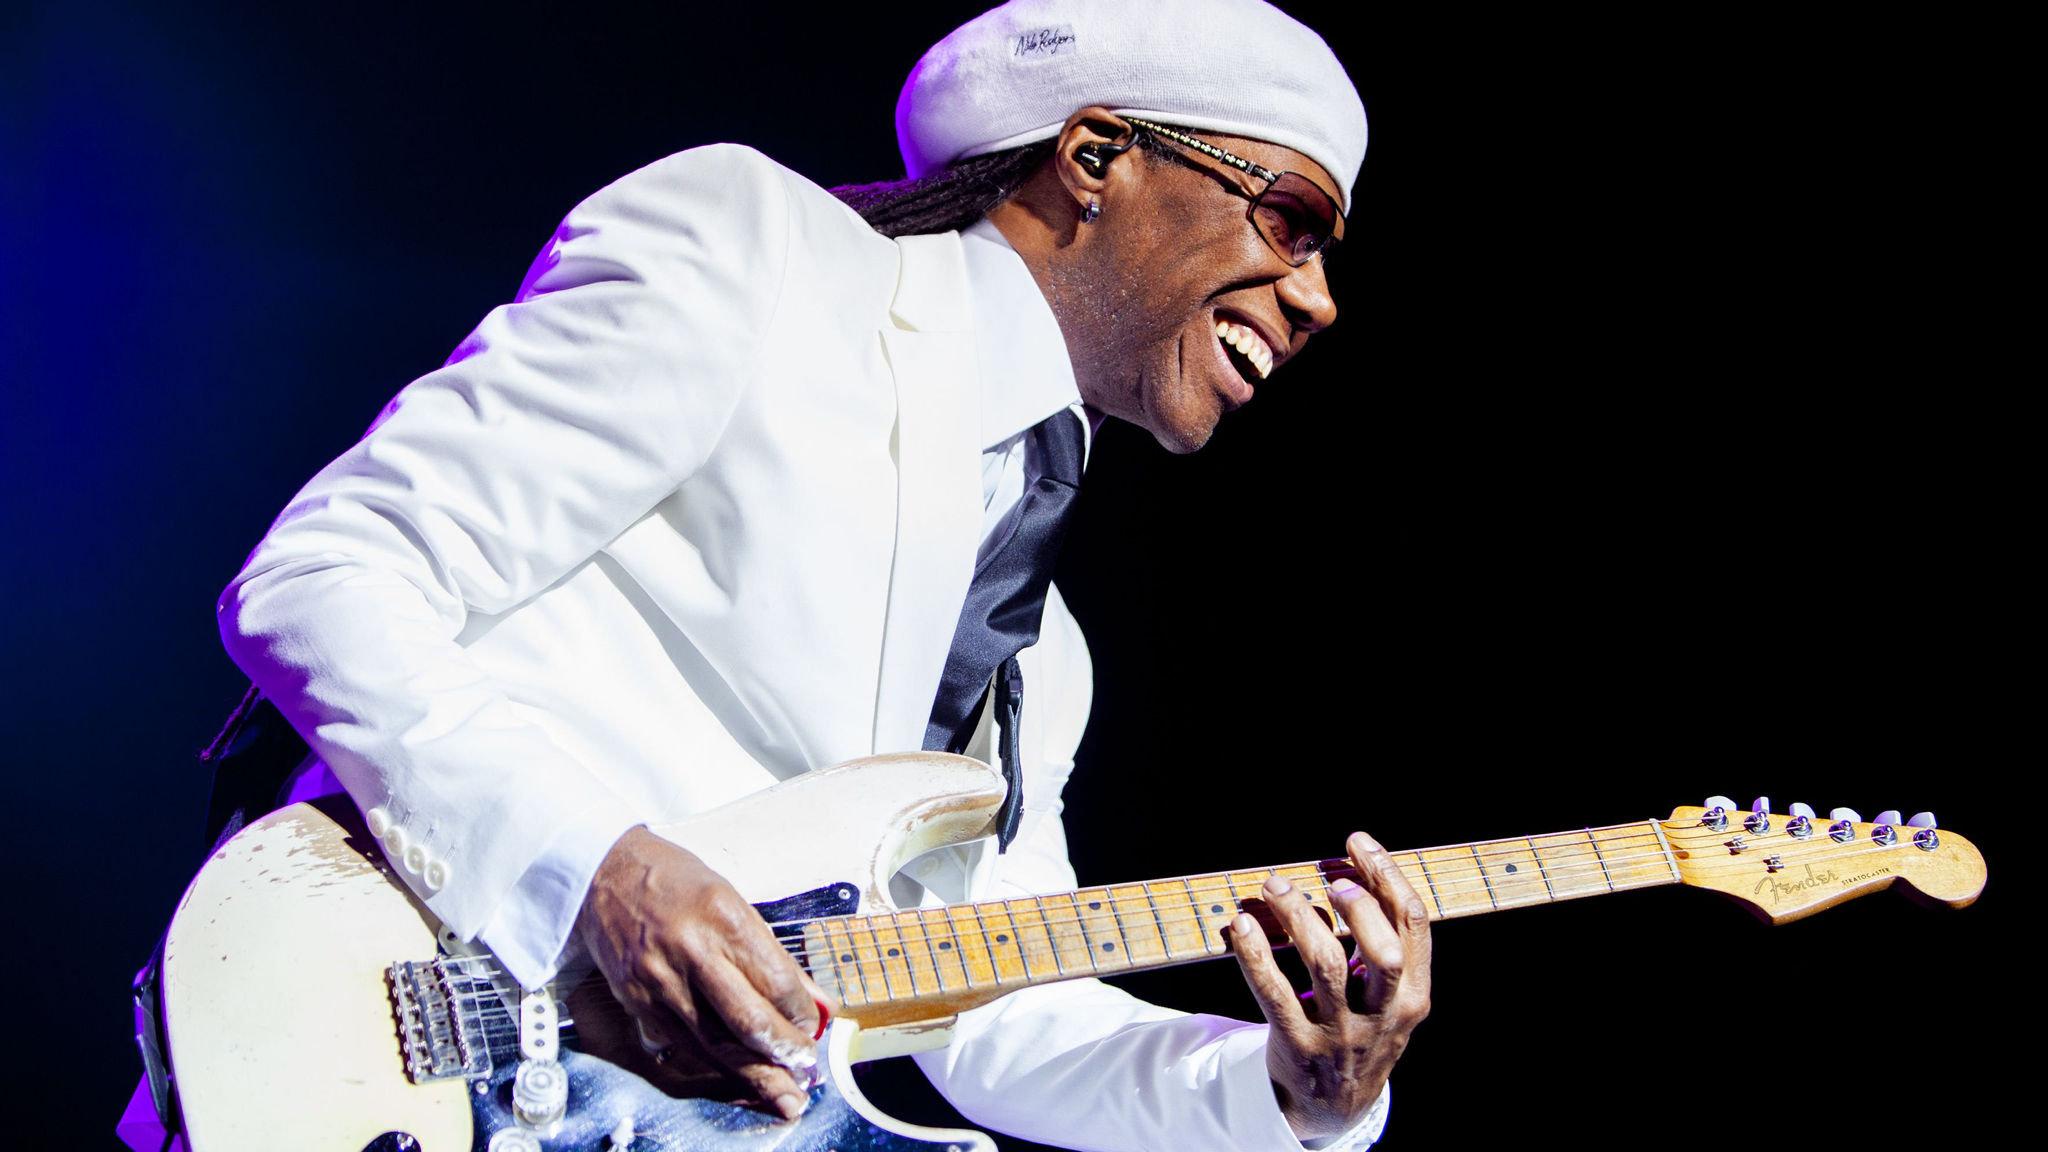 Wall To Wall Hits With Nile Rodgers & Chic At The O2 Arena, London